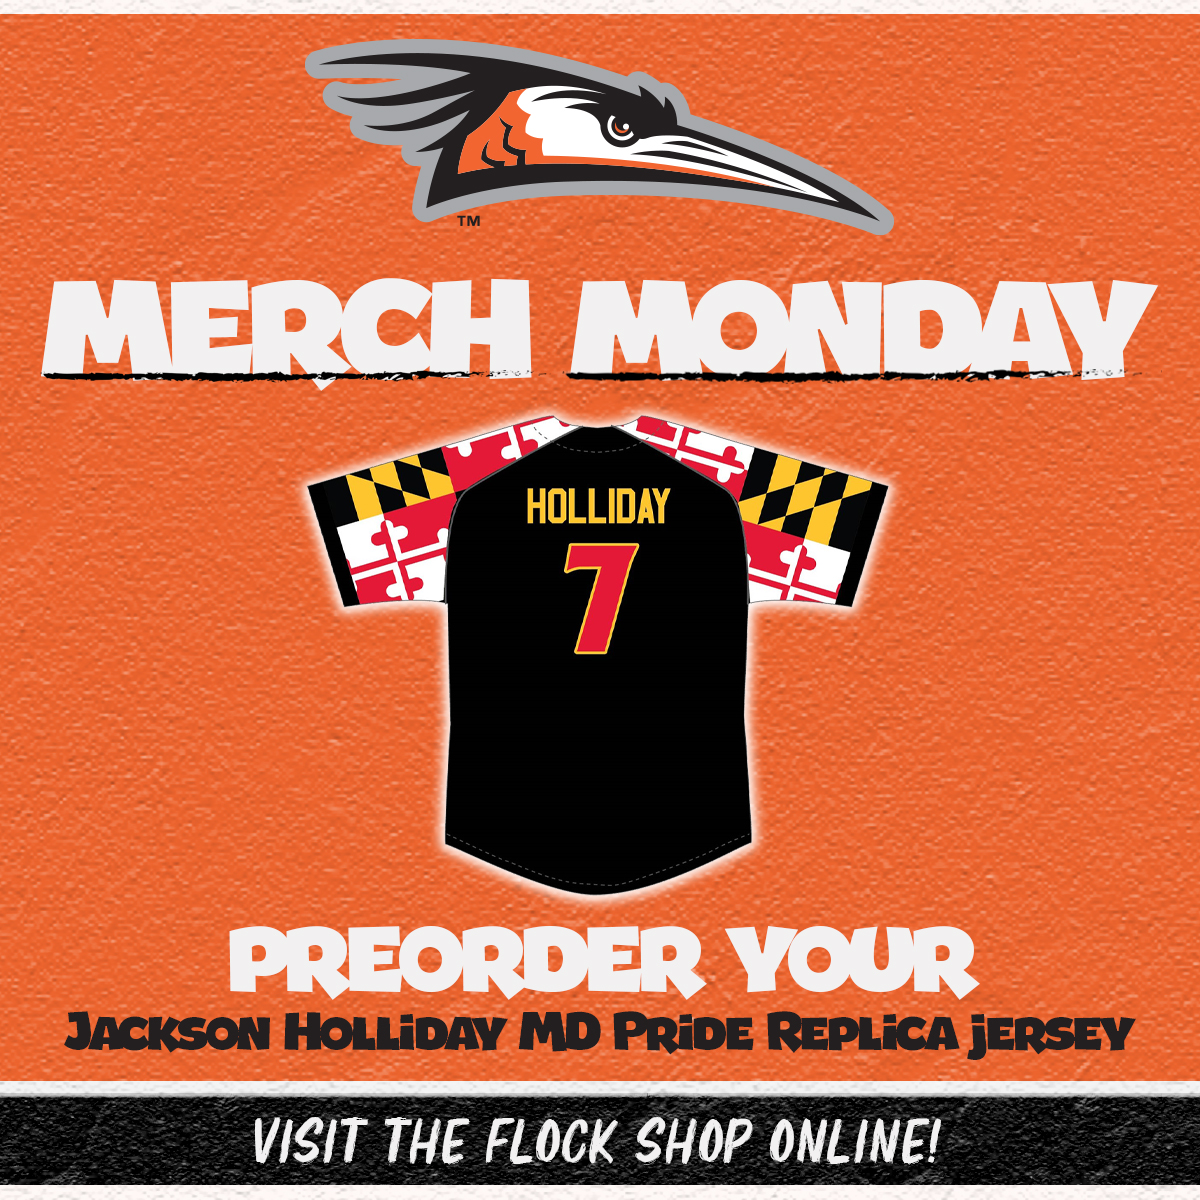 You asked, you shall receive! Preorder YOUR very own Shorebirds Maryland Pride Replica JACKSON HOLLIDAY Jersey only in the Shorebirds Flock Shop! 👇 Preorder Jersey 👉 bit.ly/44TFSFN #FlyTogether | #Birdland